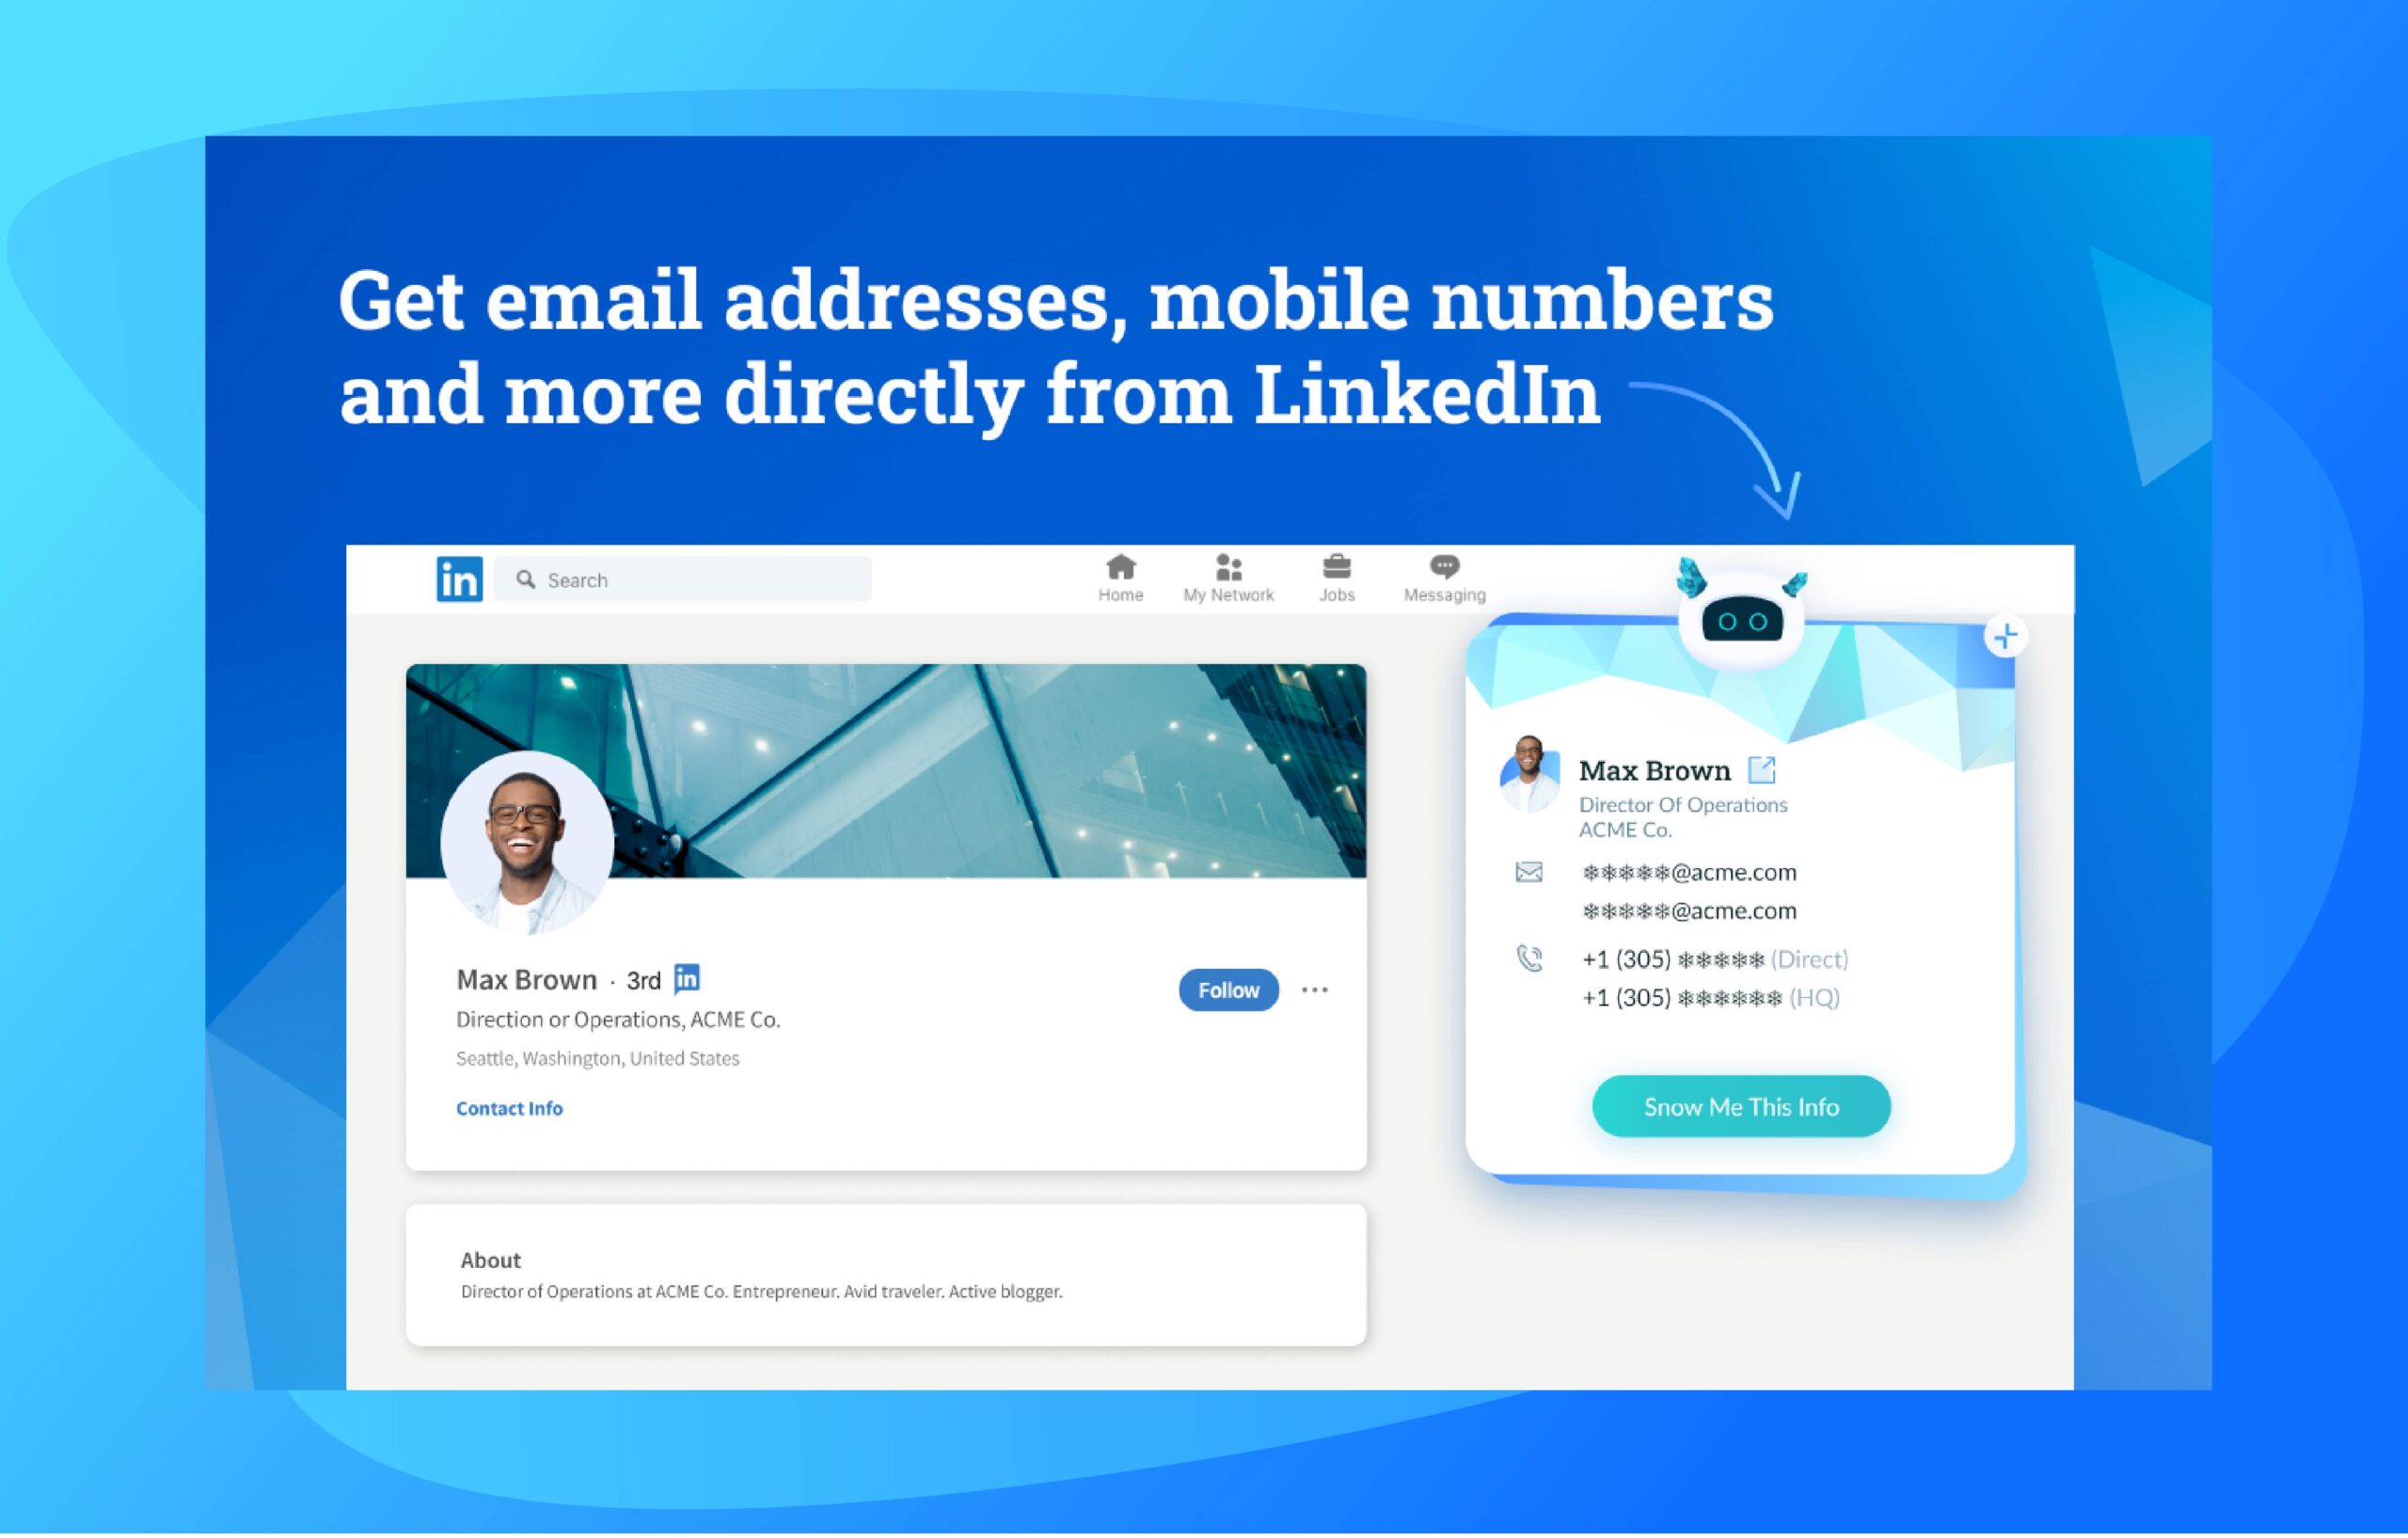 With Datanyze you can get email addresses, mobile numbers and more directly from LinkedIn